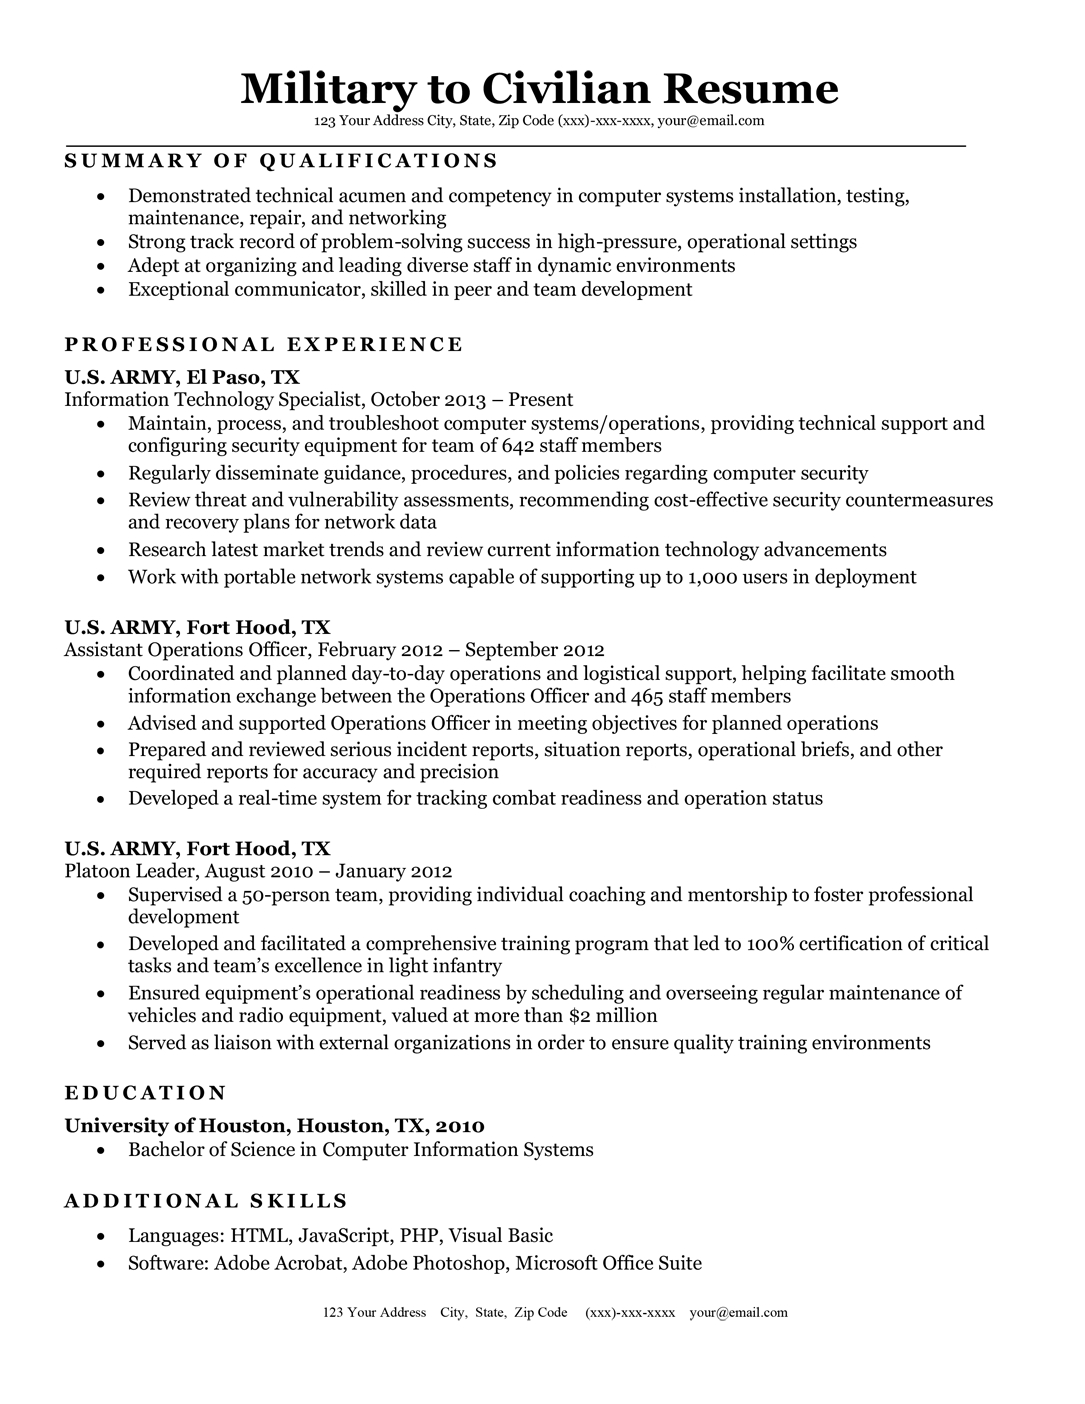 Military To Civilian Resume Sample Tips Resume Companion for size 1085 X 1404